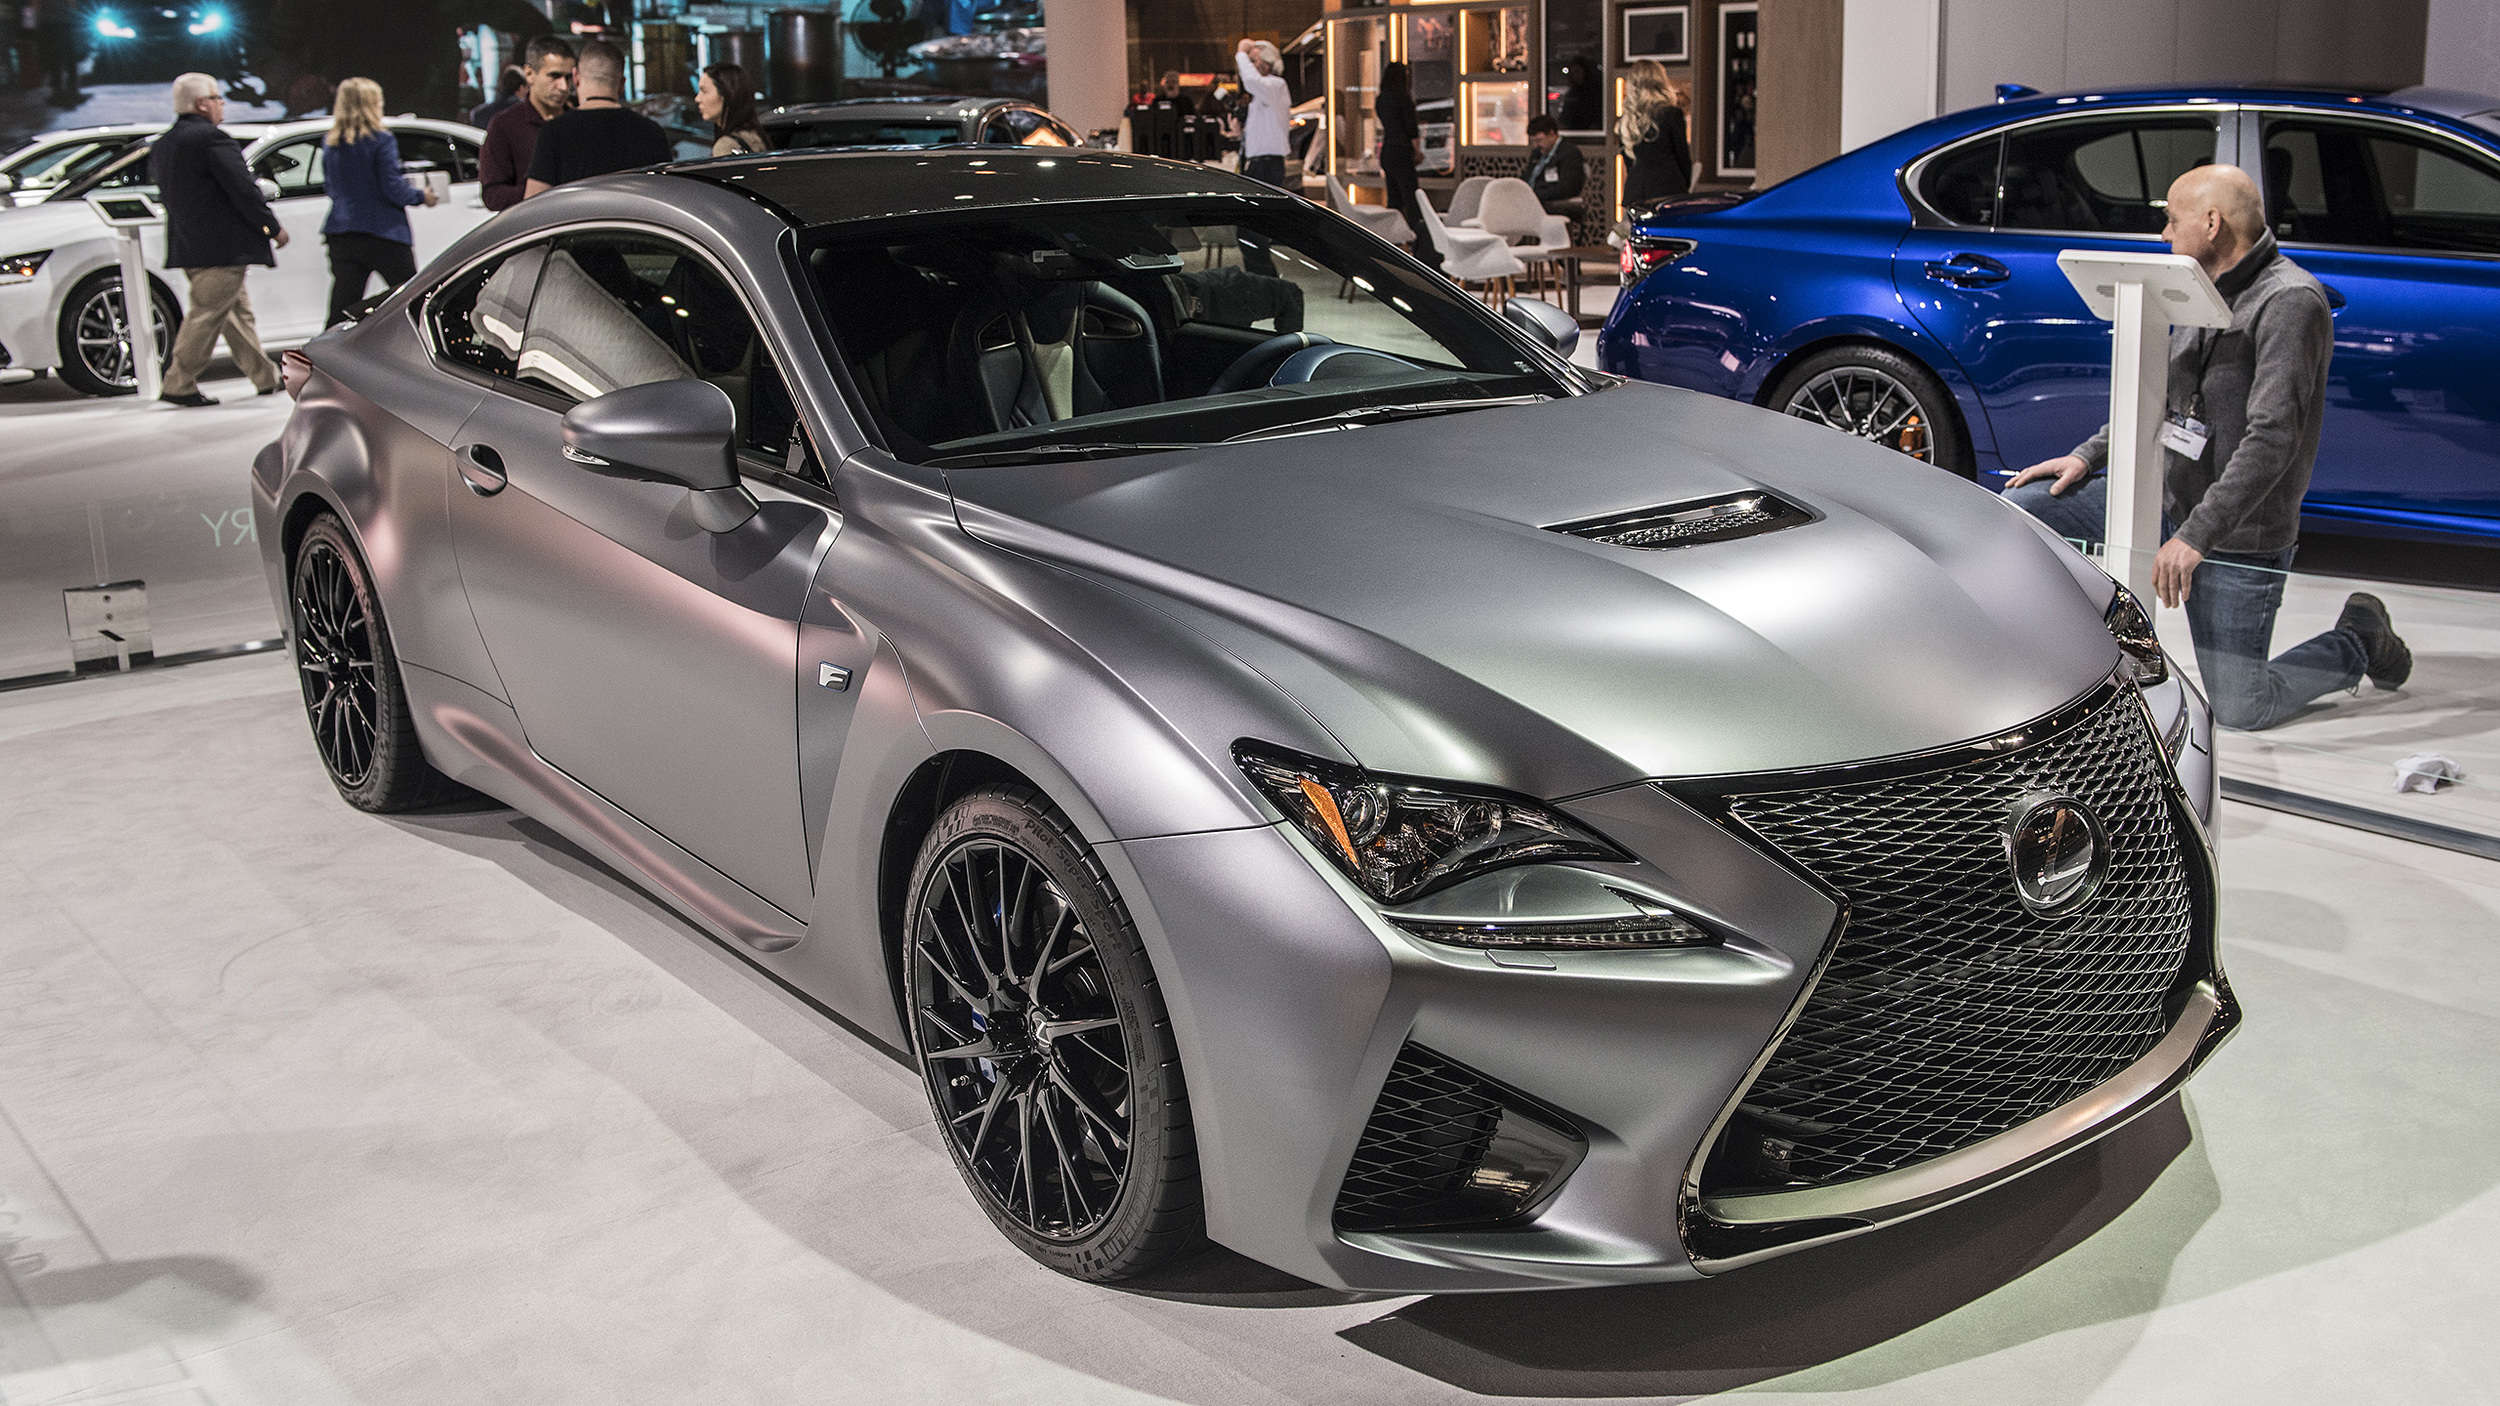 2019 Lexus RC F 10th Anniversary Special Edition: Chicago 2018 Photo Gallery